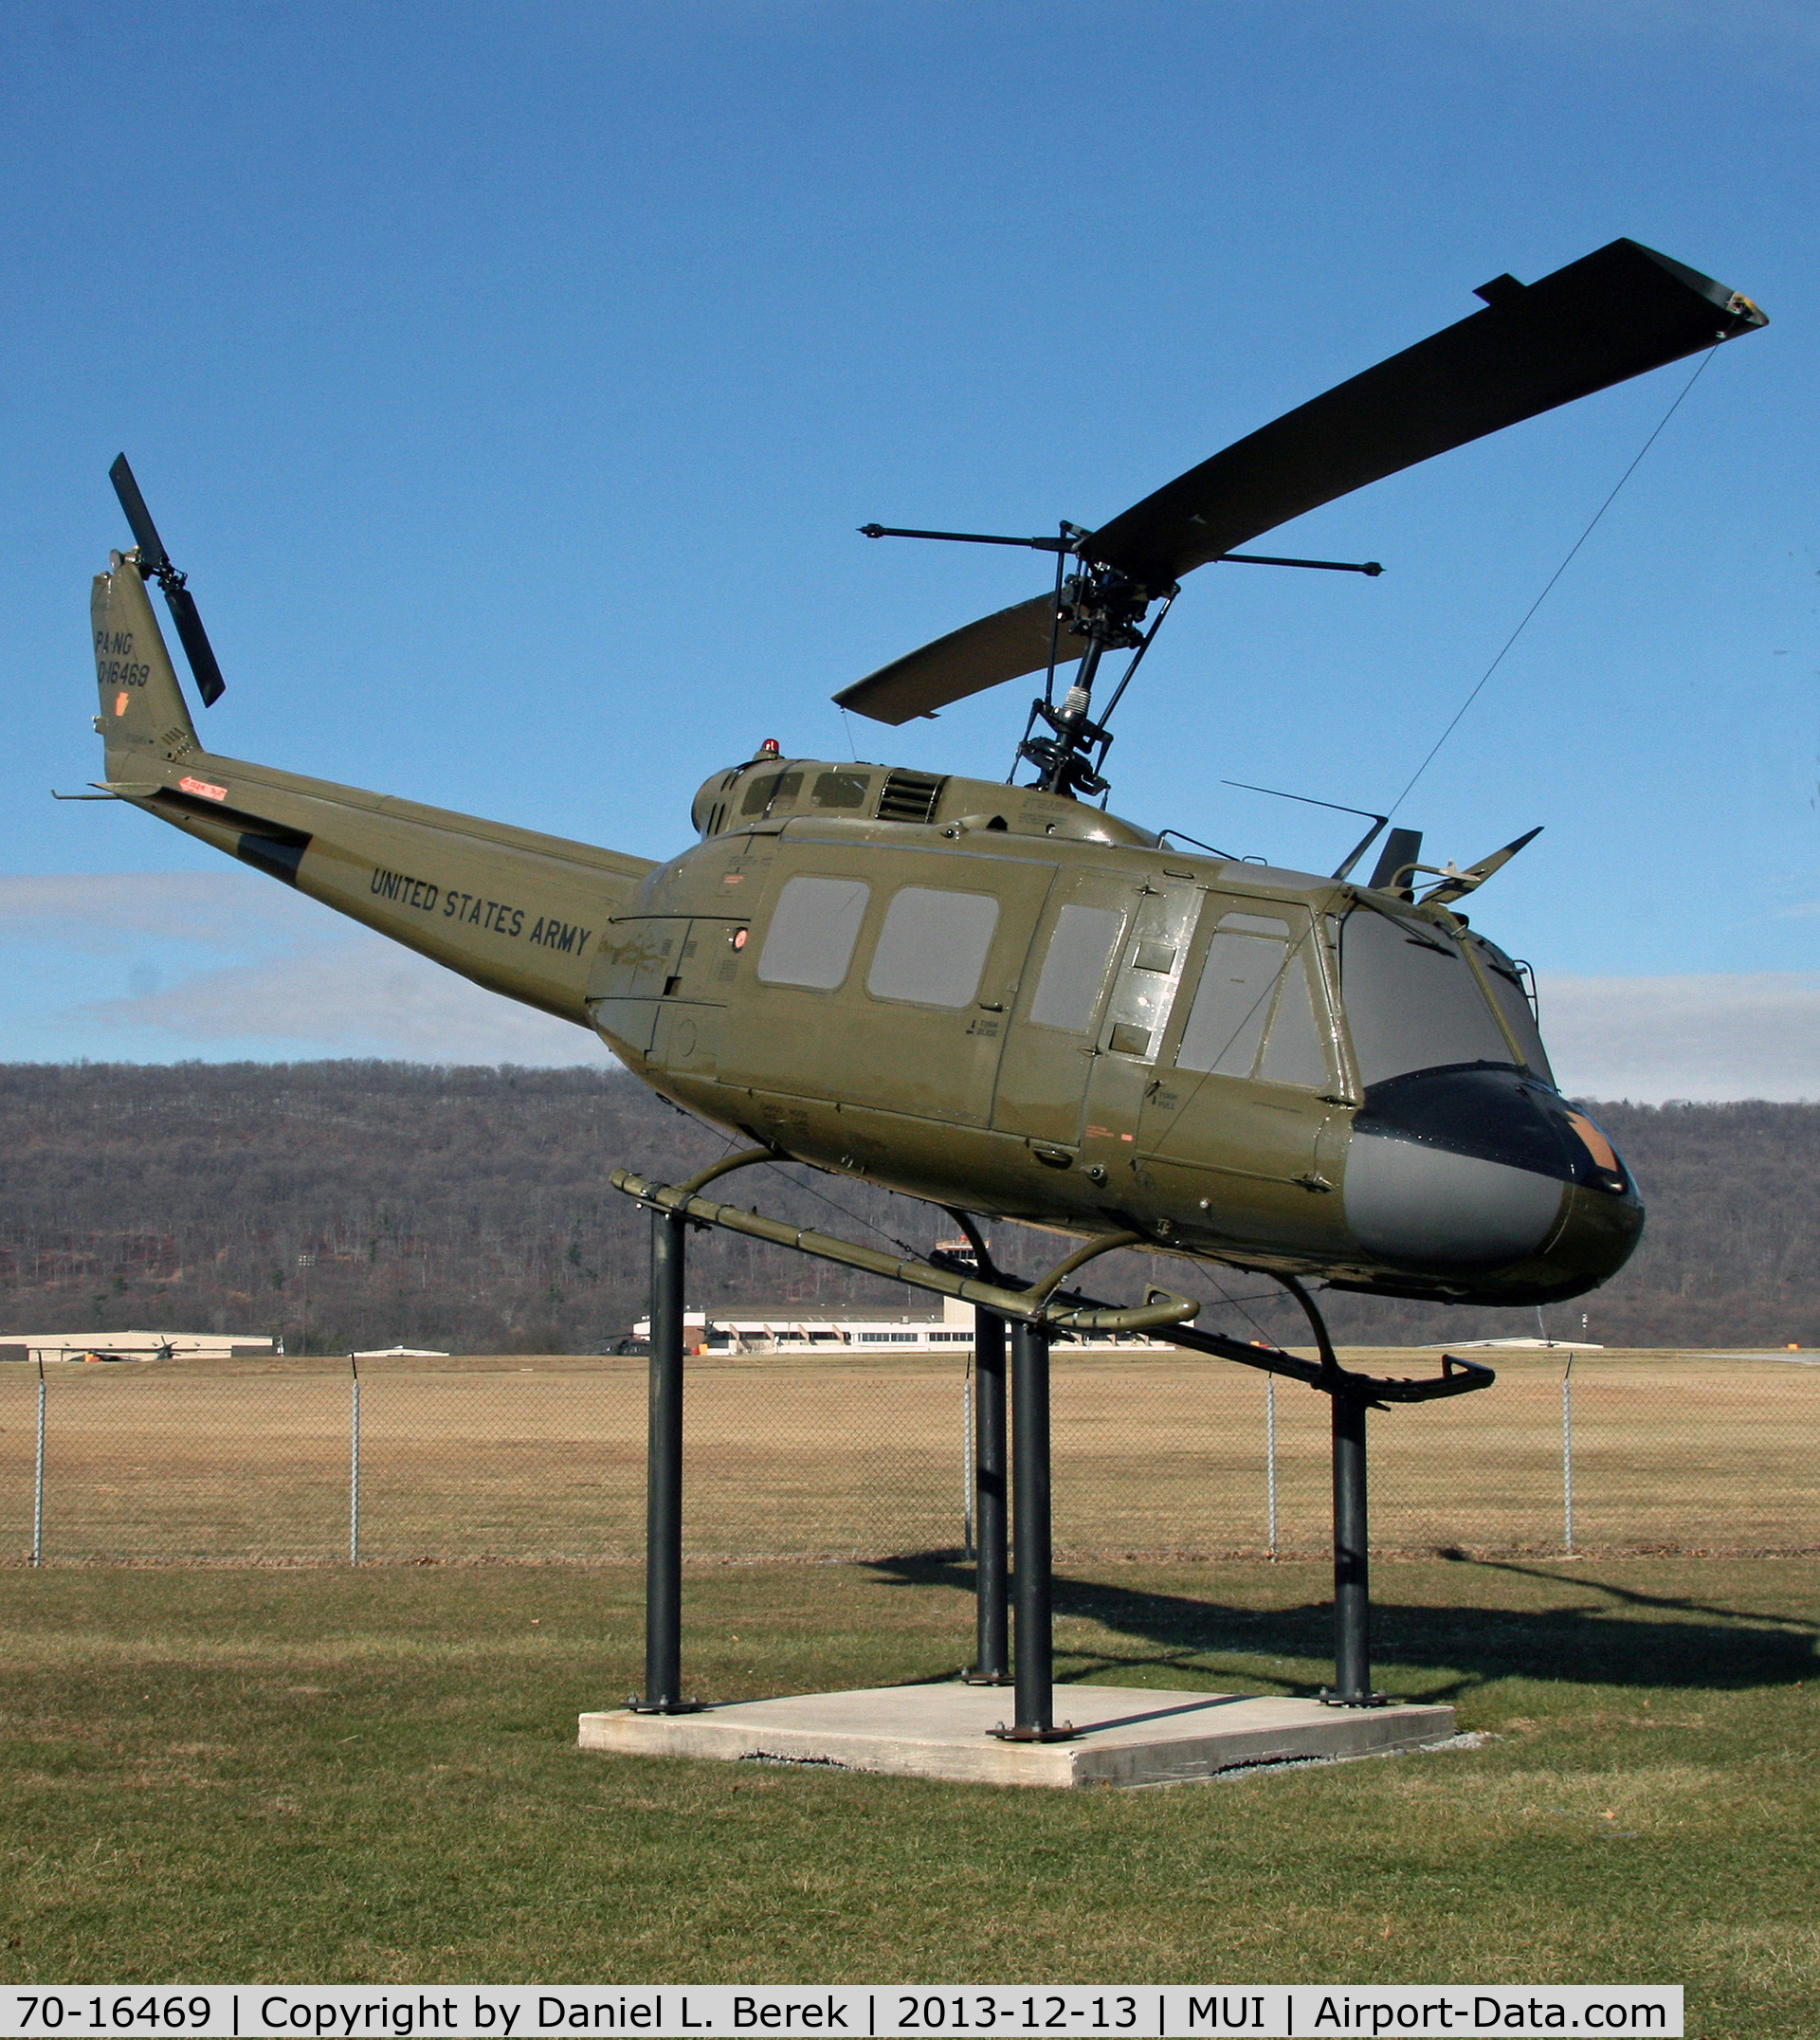 70-16469, 1970 Bell UH-1H Iroquois C/N 12774, This iconic helicopter is not on display at the Pennsylvania National Guard Military Museum.